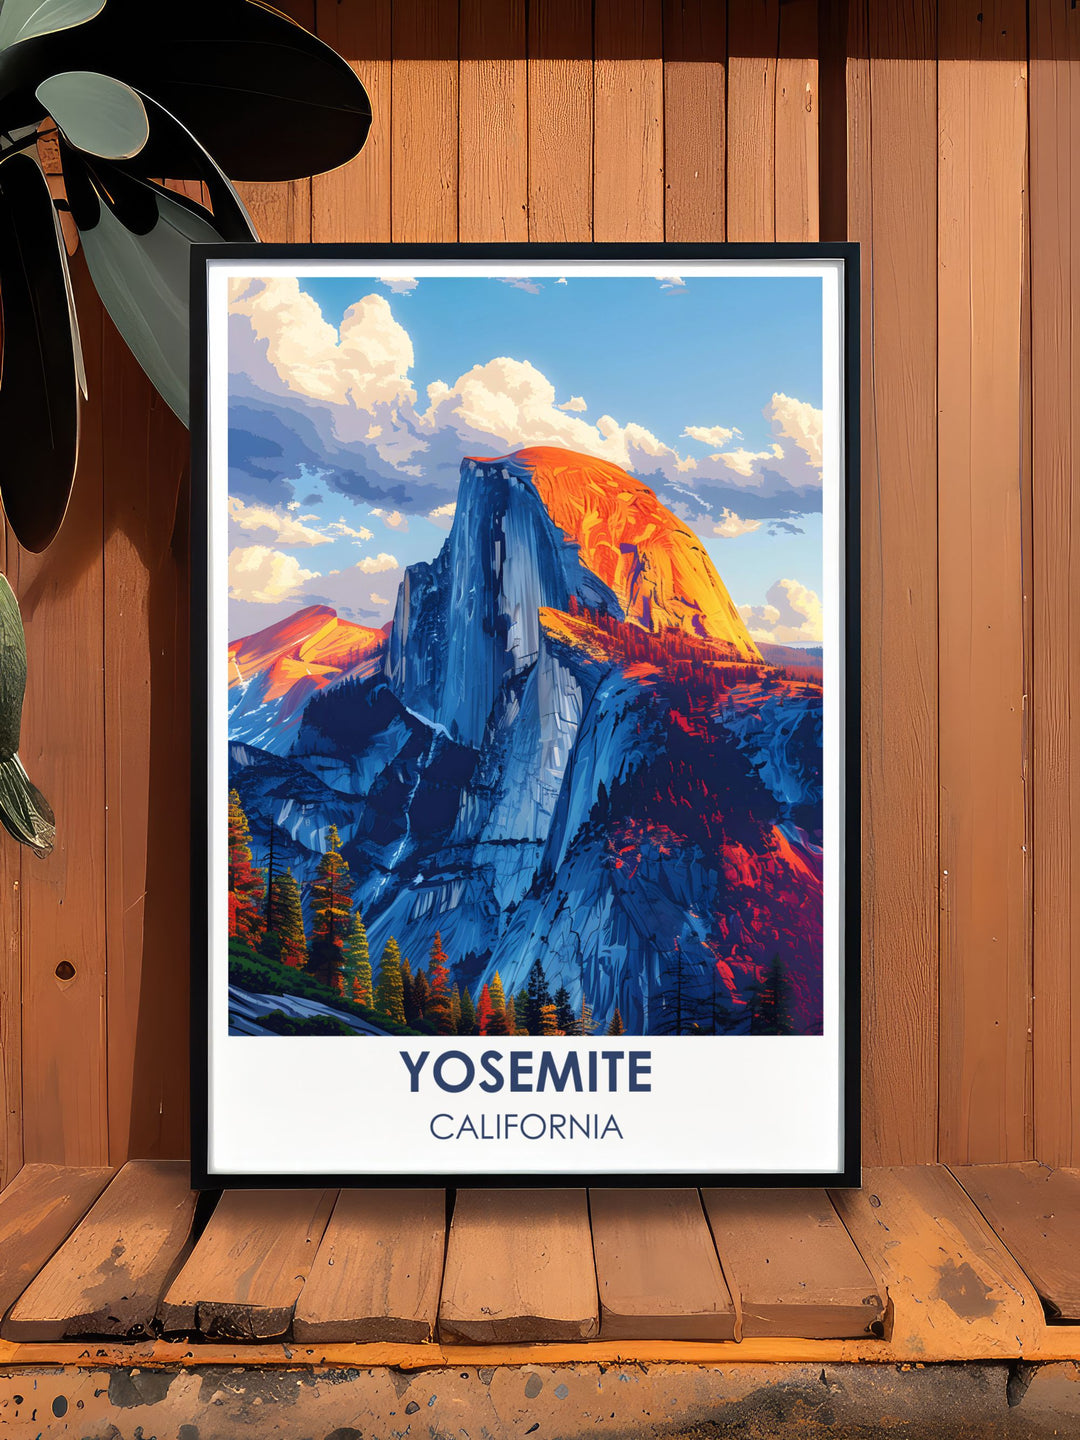 Bring the breathtaking landscapes of Yosemite into your home with this poster of El Capitan, showcasing the sheer granite face and the vibrant forest below, perfect for creating a nature inspired decor theme.